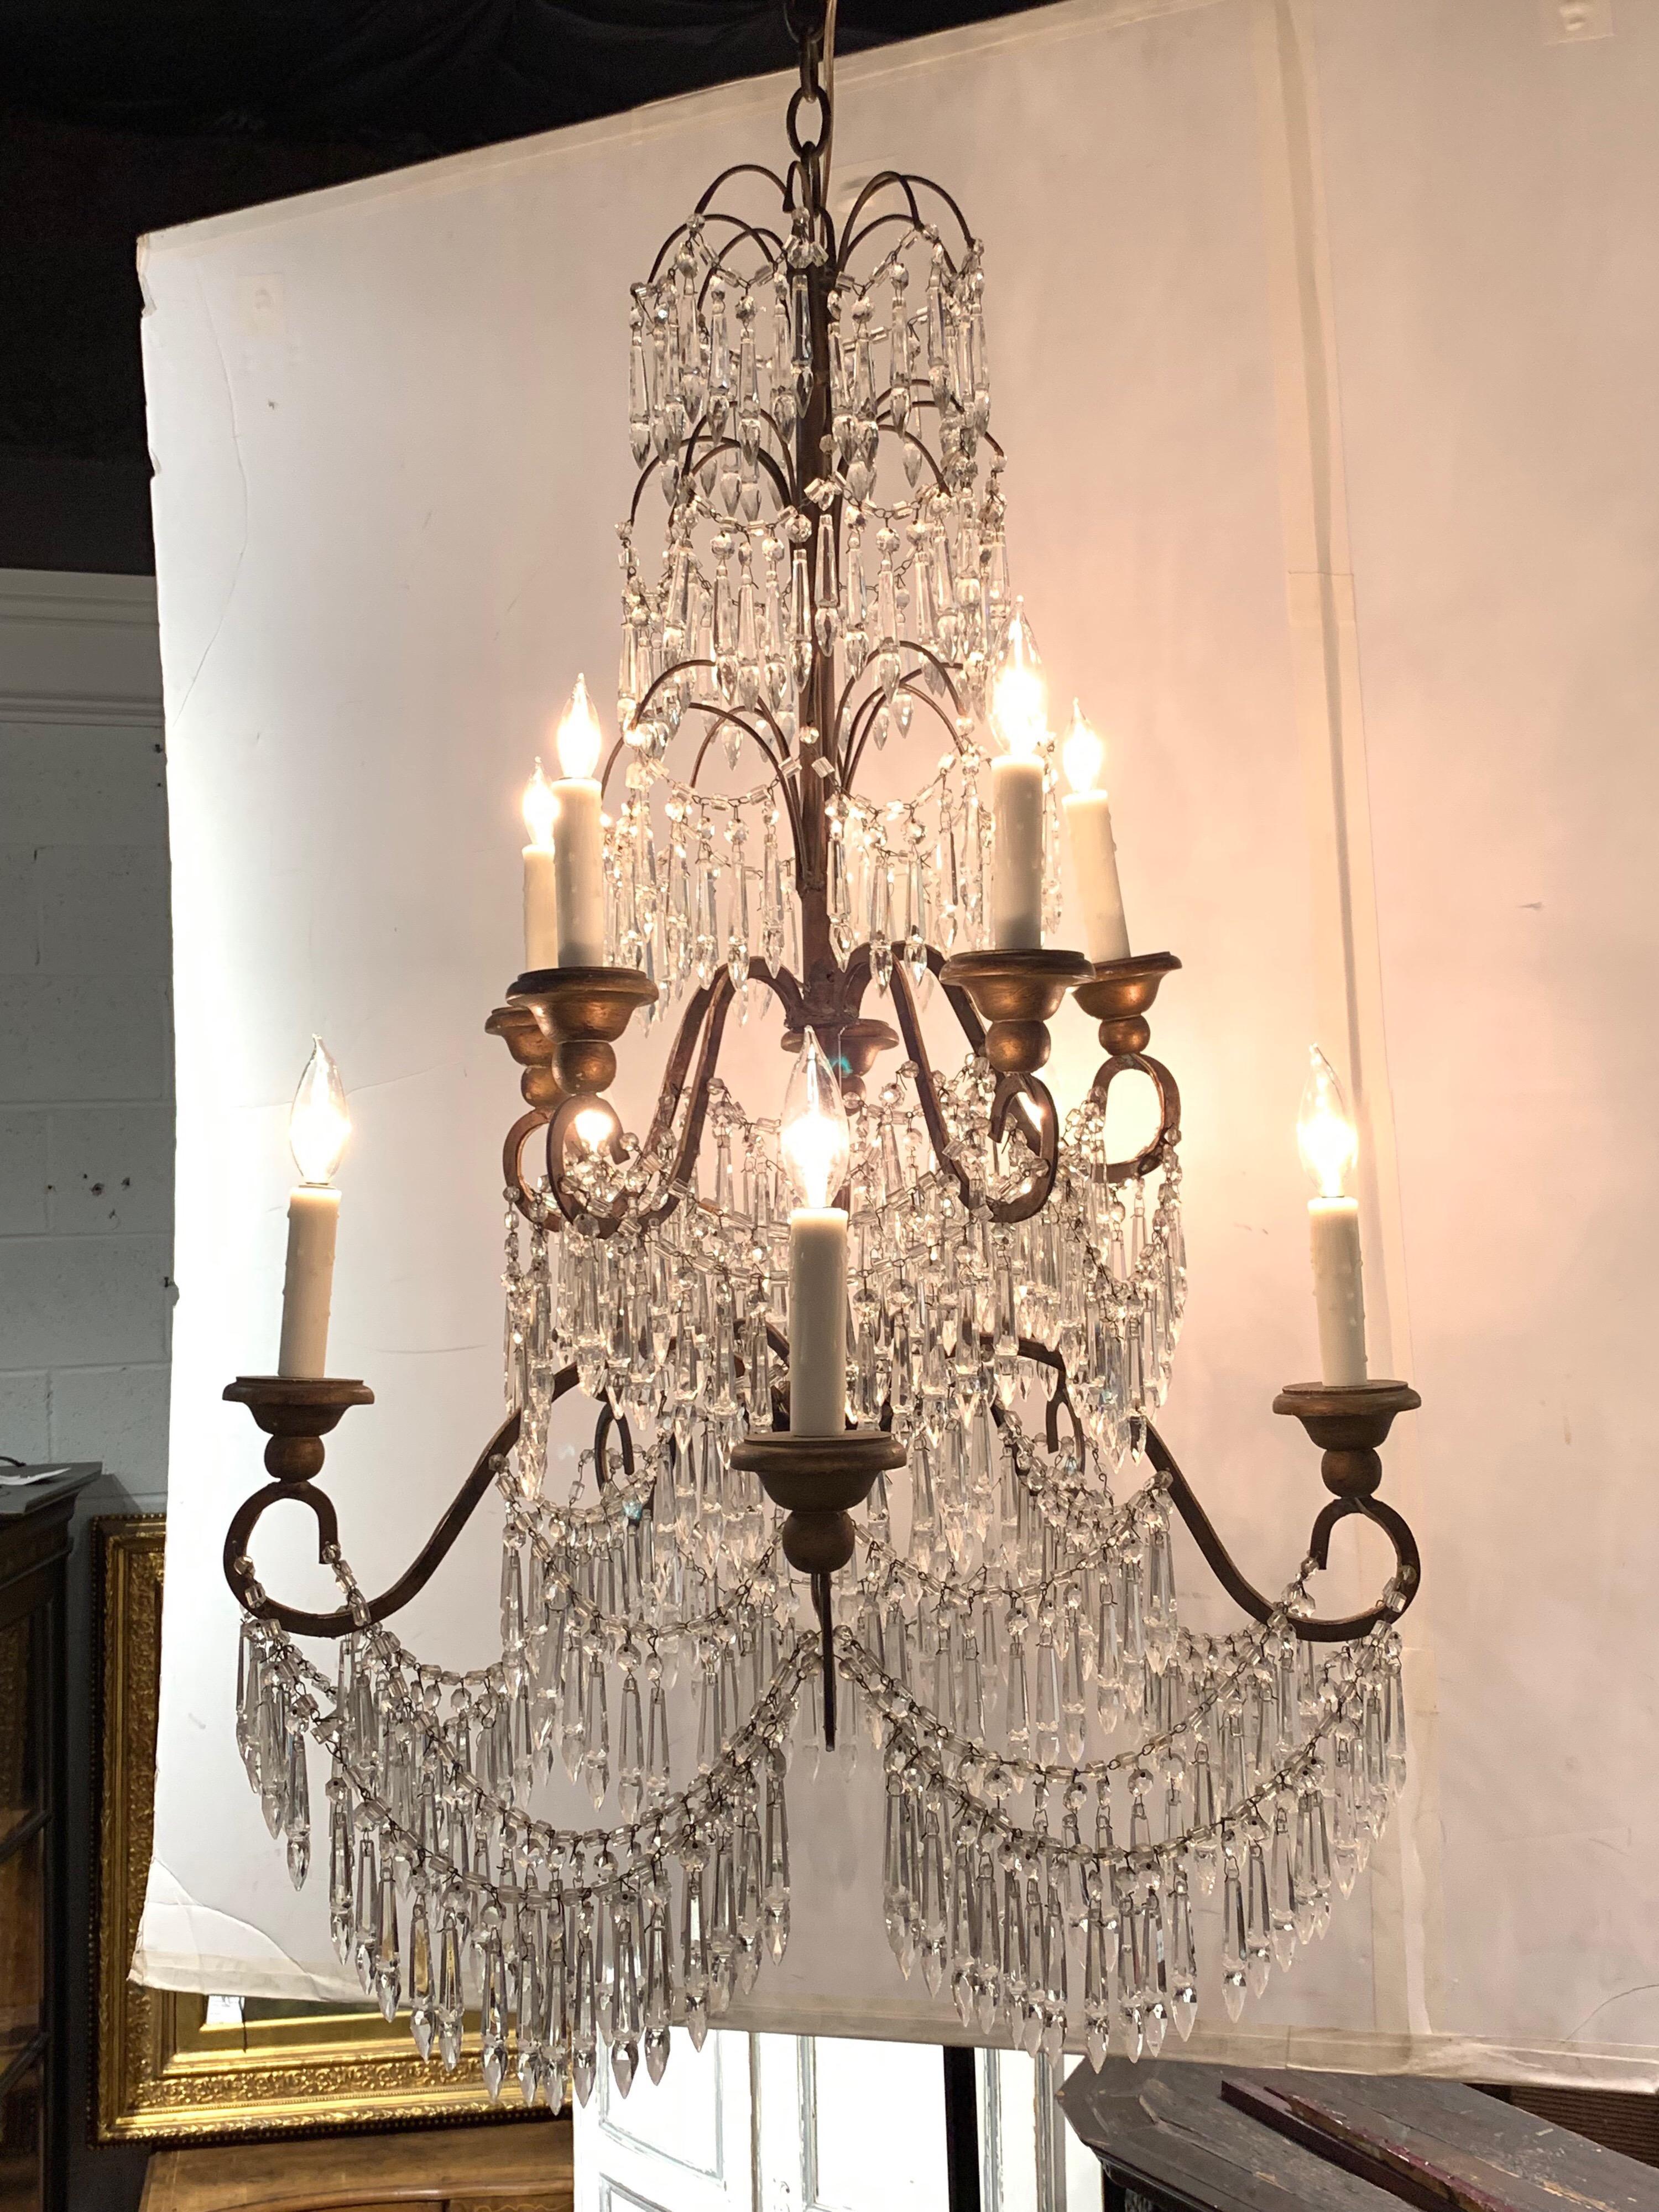 Gorgeous 19th century Italian crystal chandelier with 10 lights and beautiful cascading prisms.
Makes a lovely statement in a fine home.